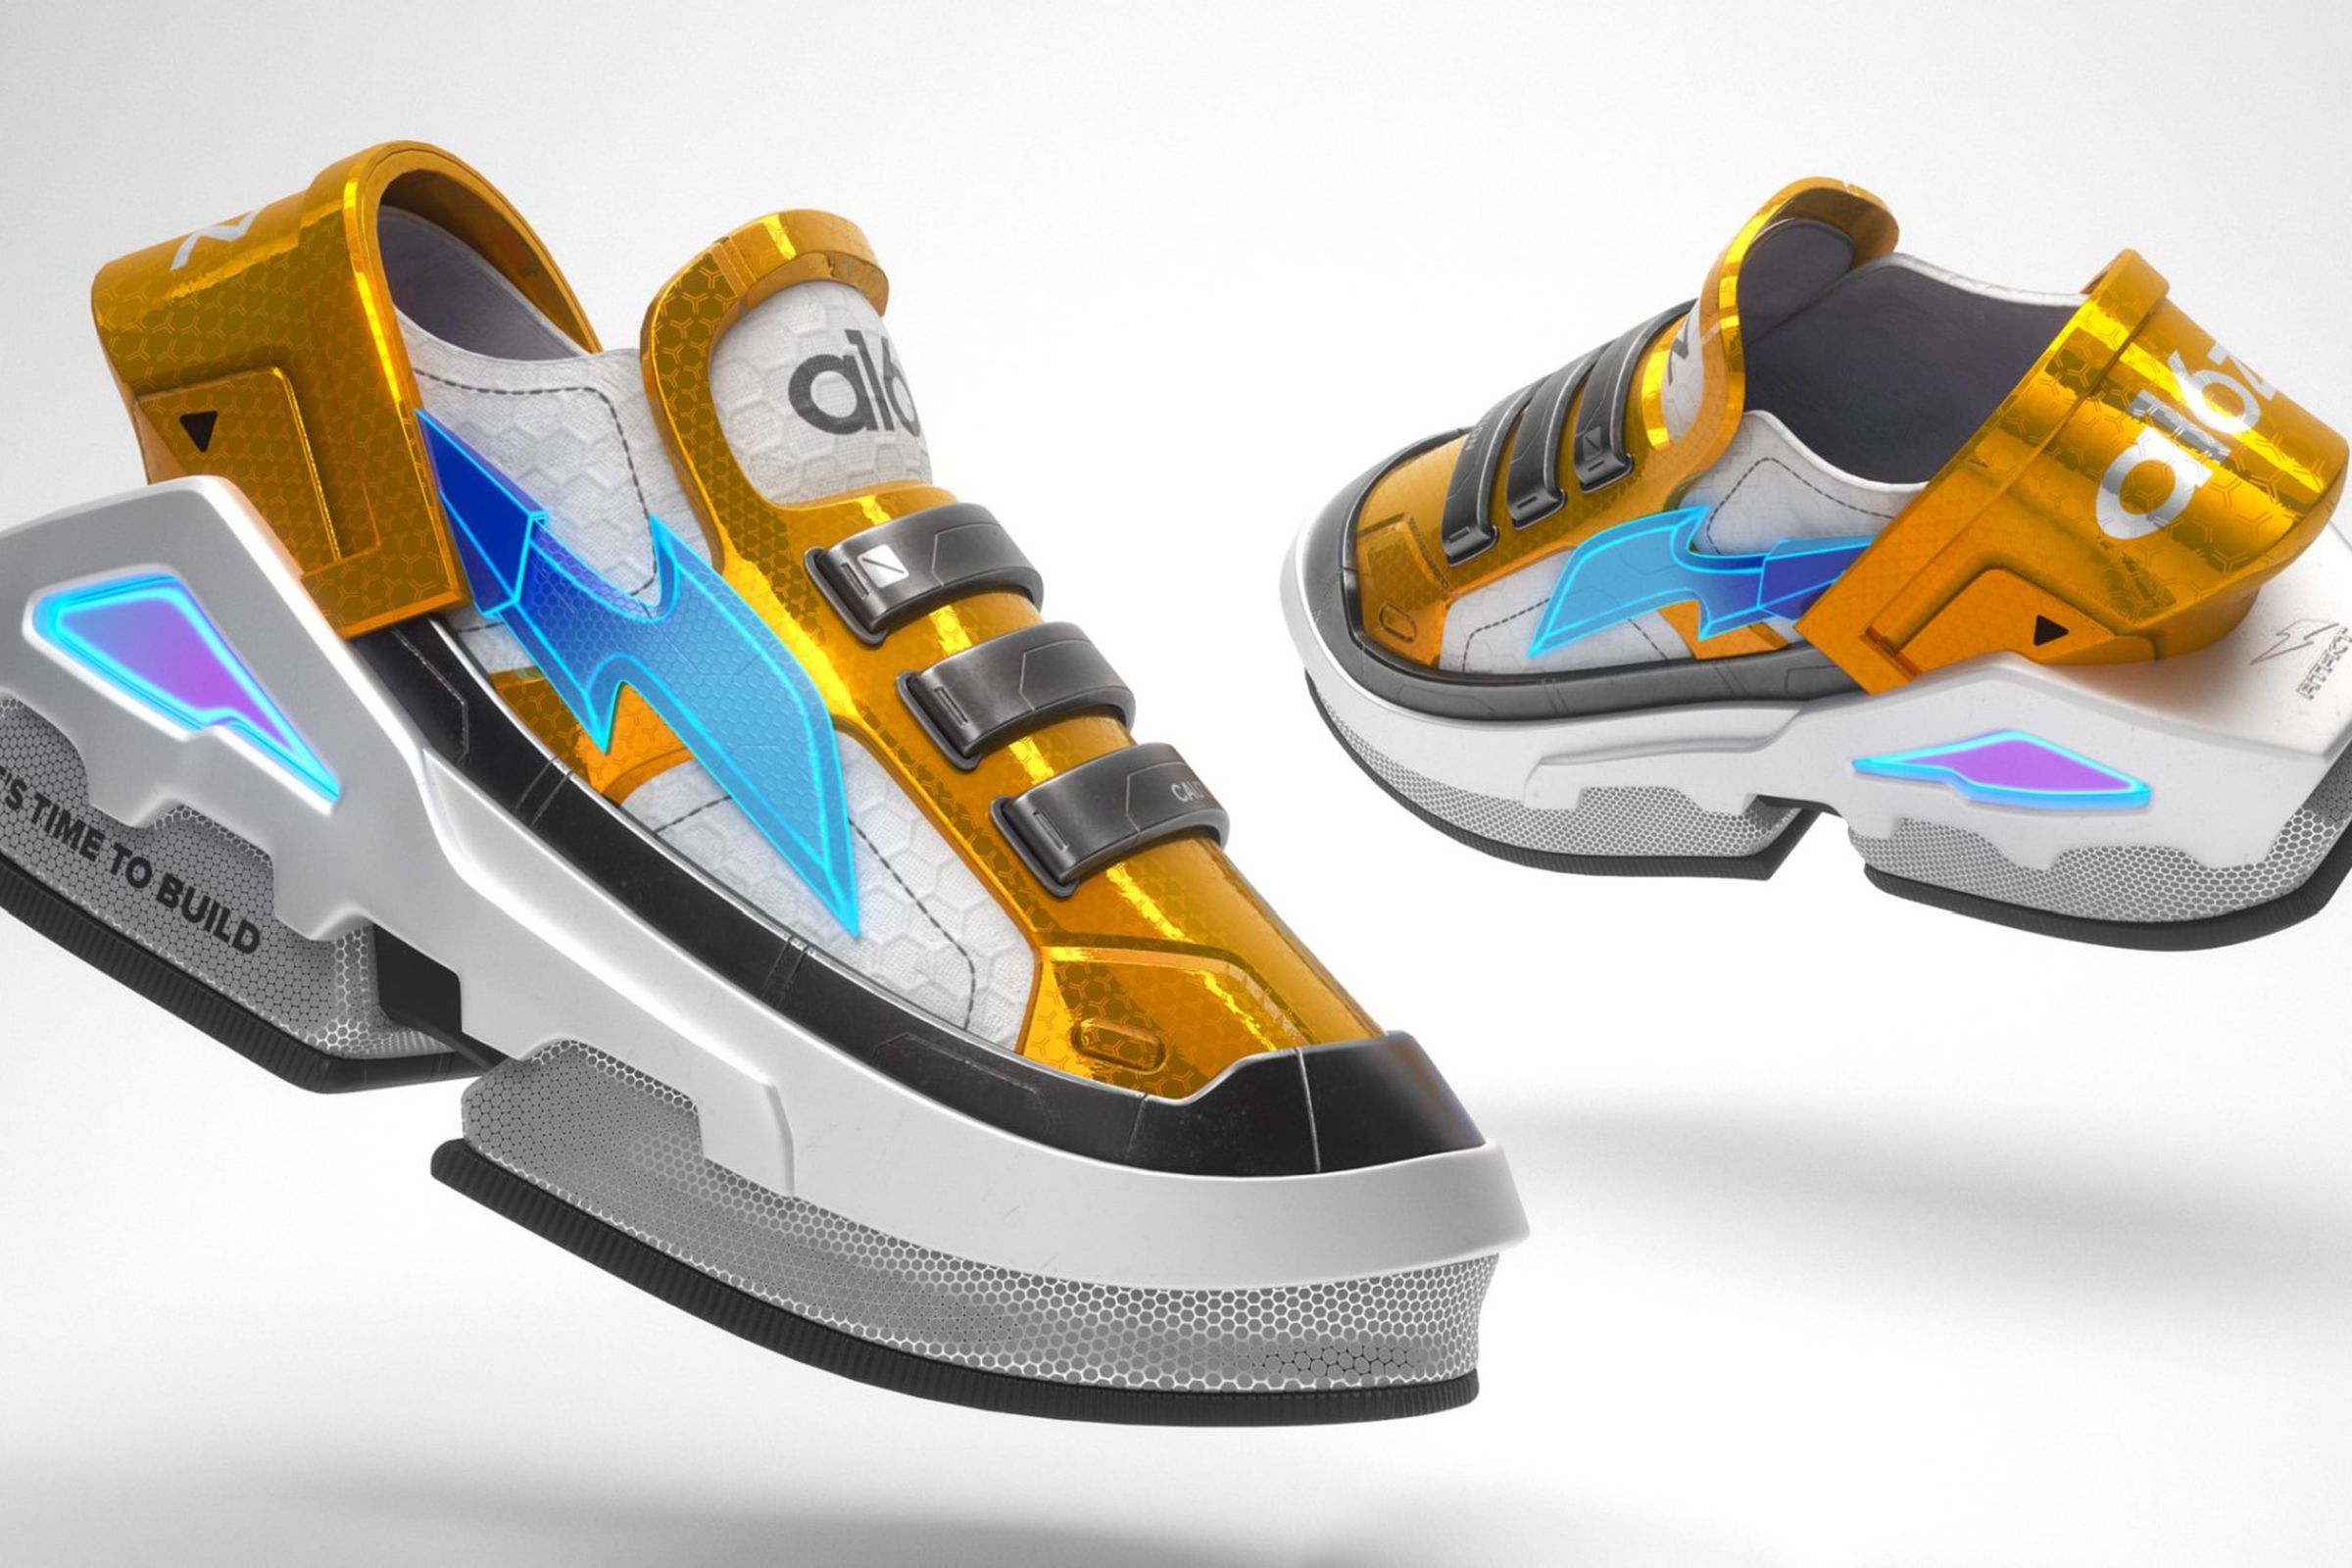 RTFKT made these A16Z sneakers to celebrate a round of venture capital funding